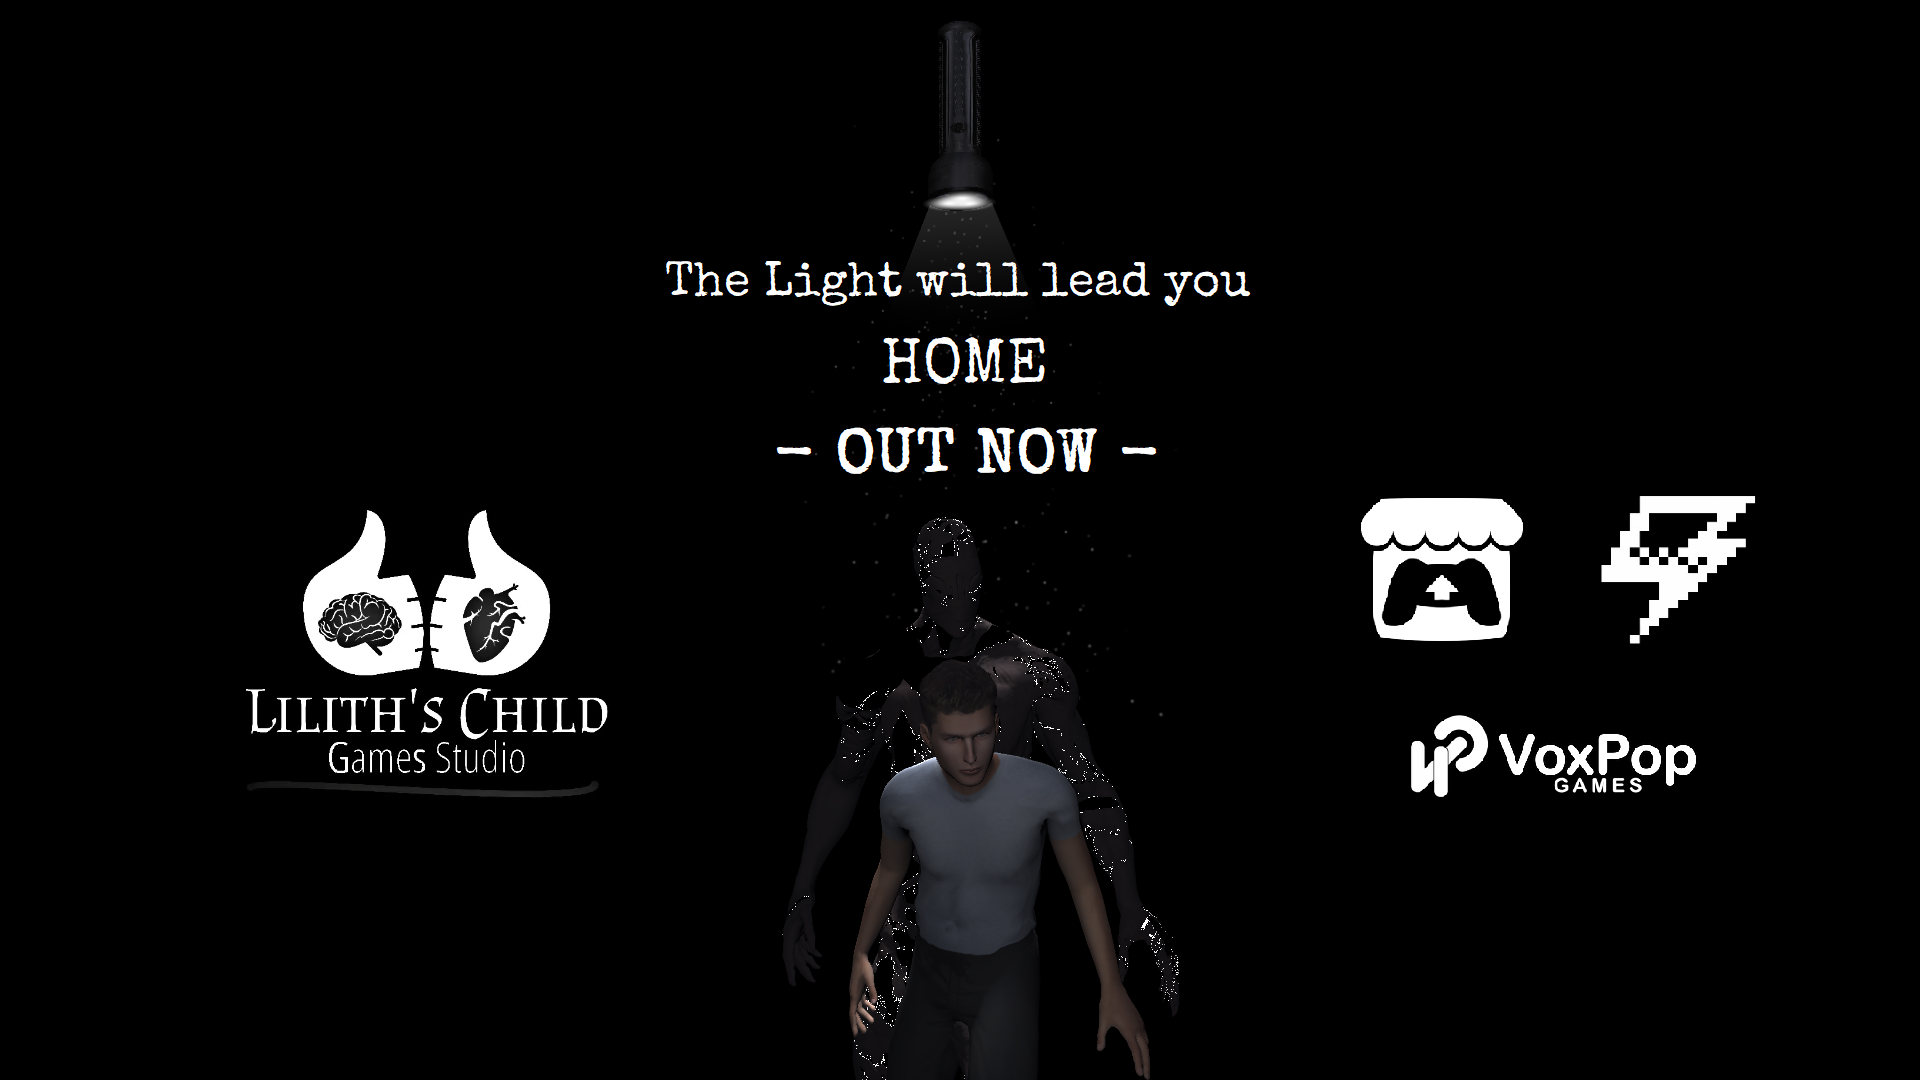 The Light will lead you HOME